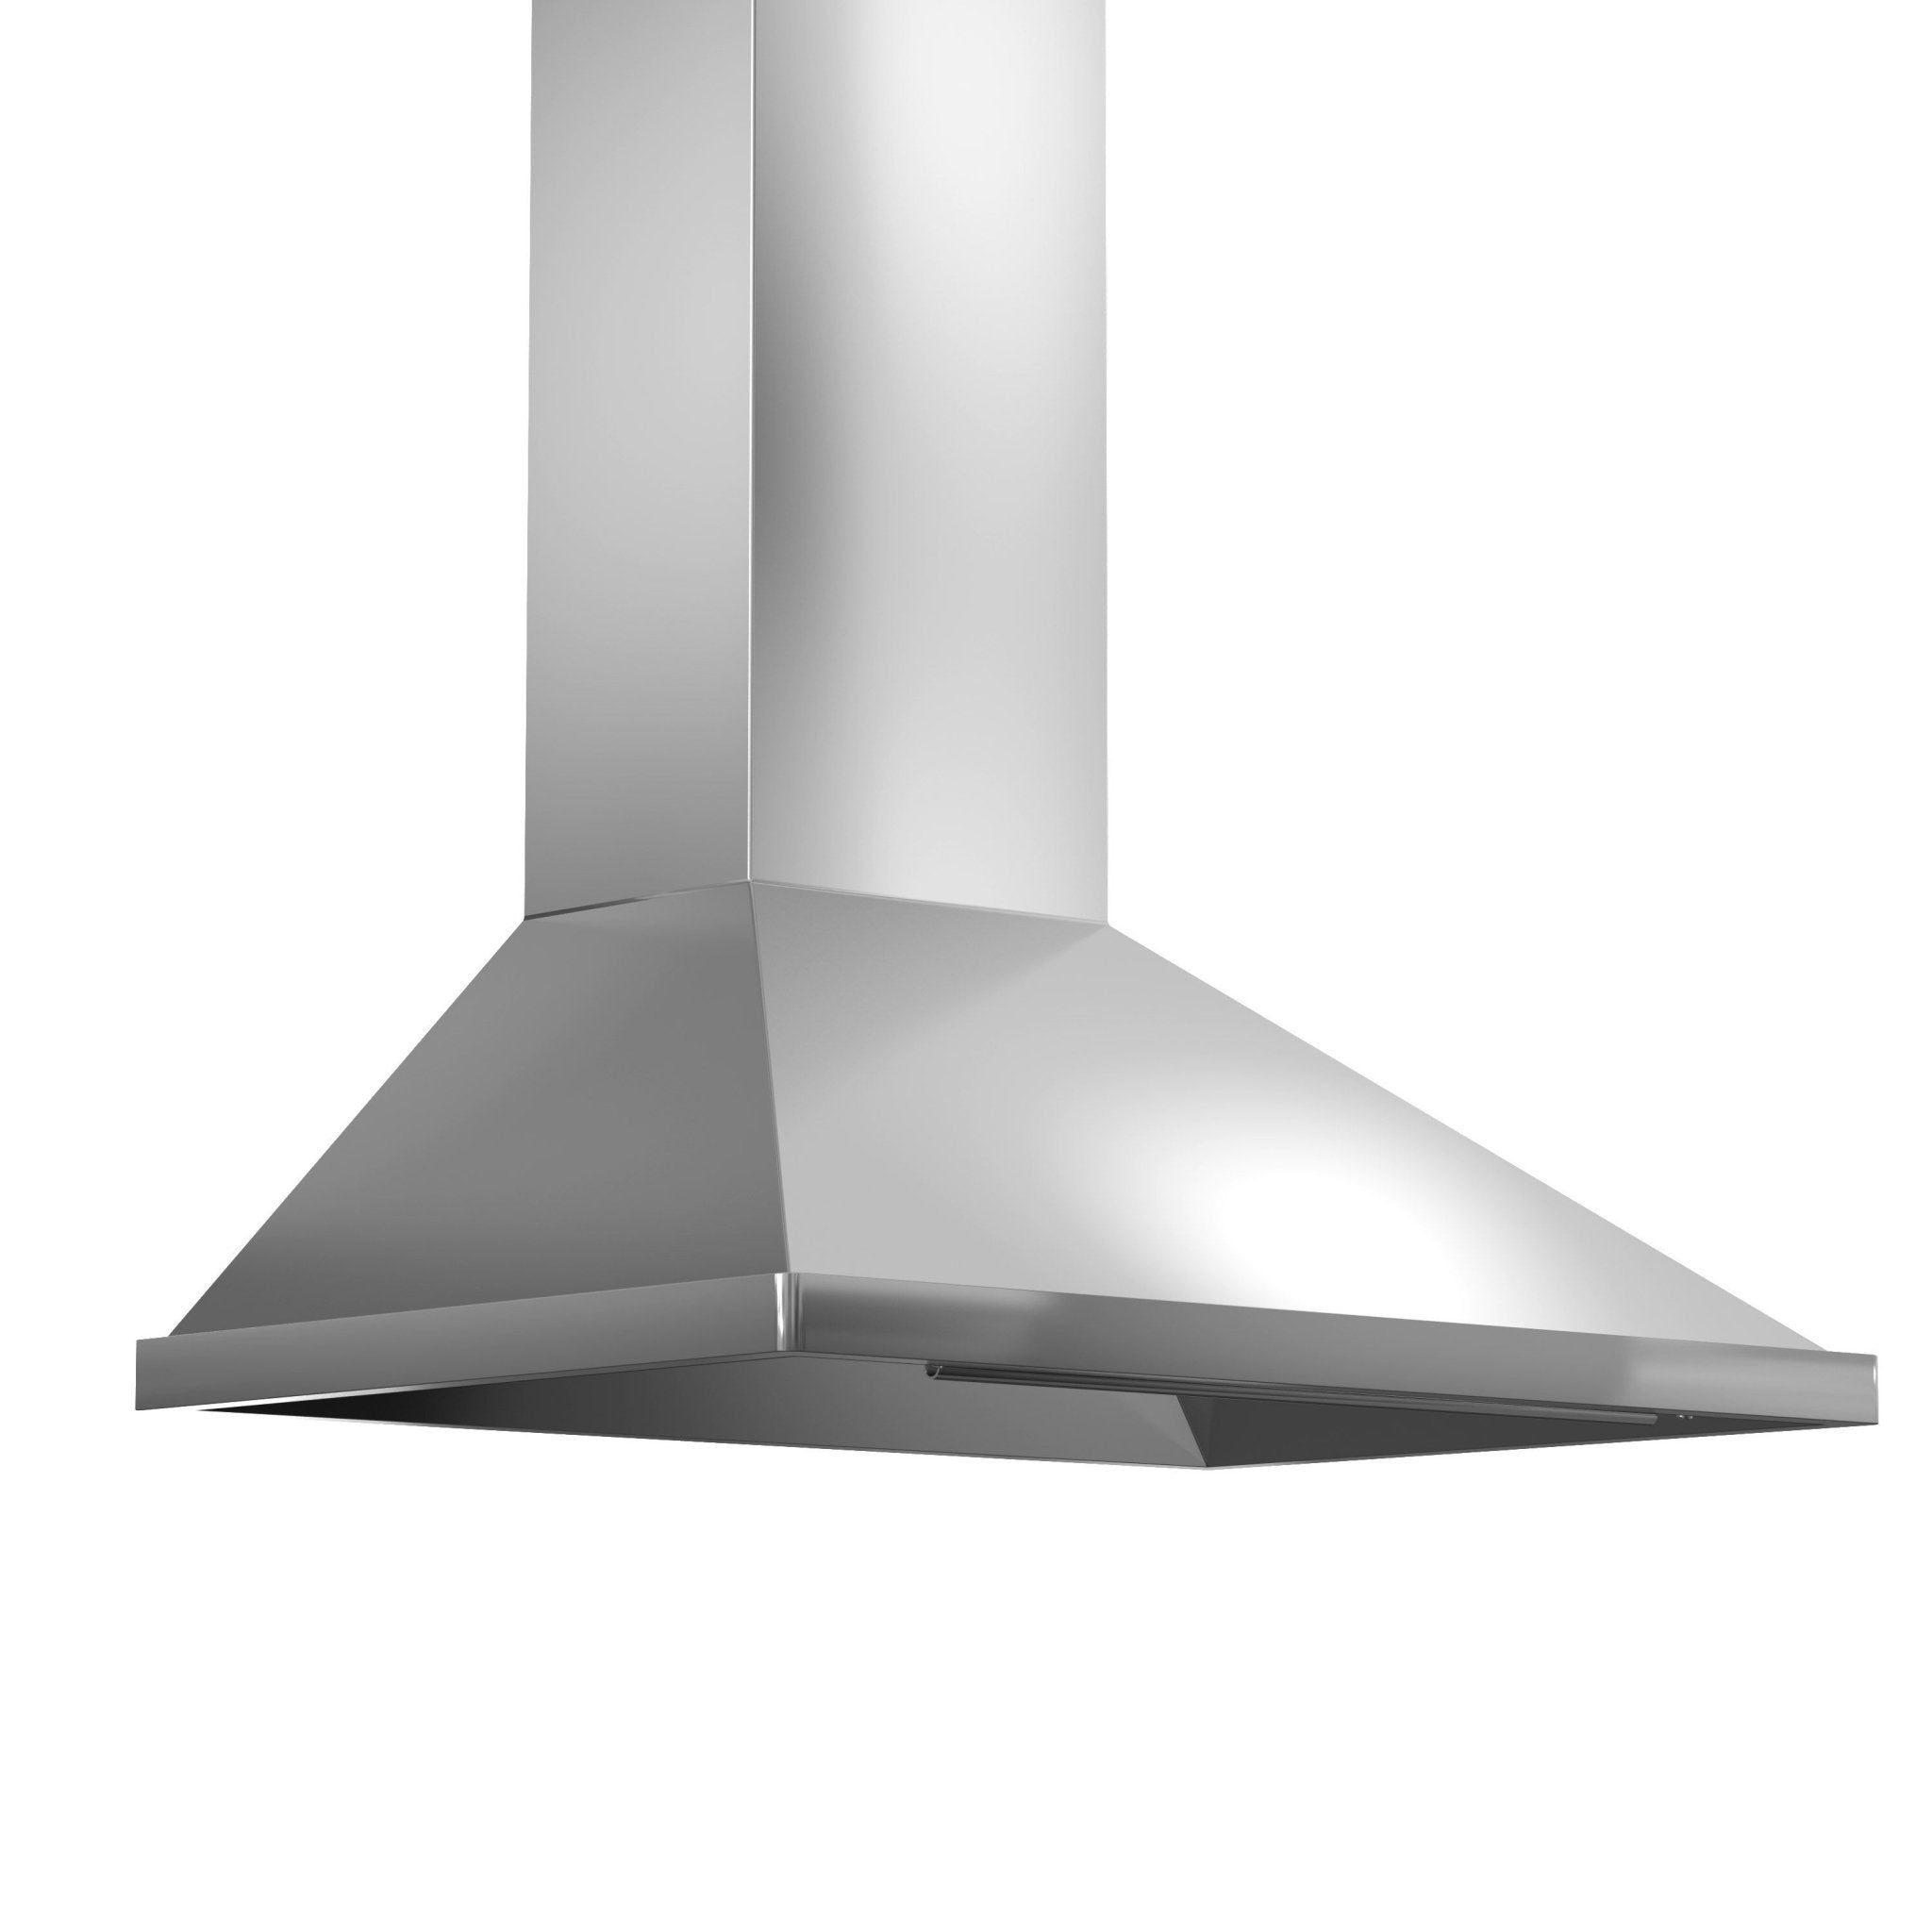 ZLINE Professional Convertible Vent Wall Mount Range Hood in Stainless Steel - 696